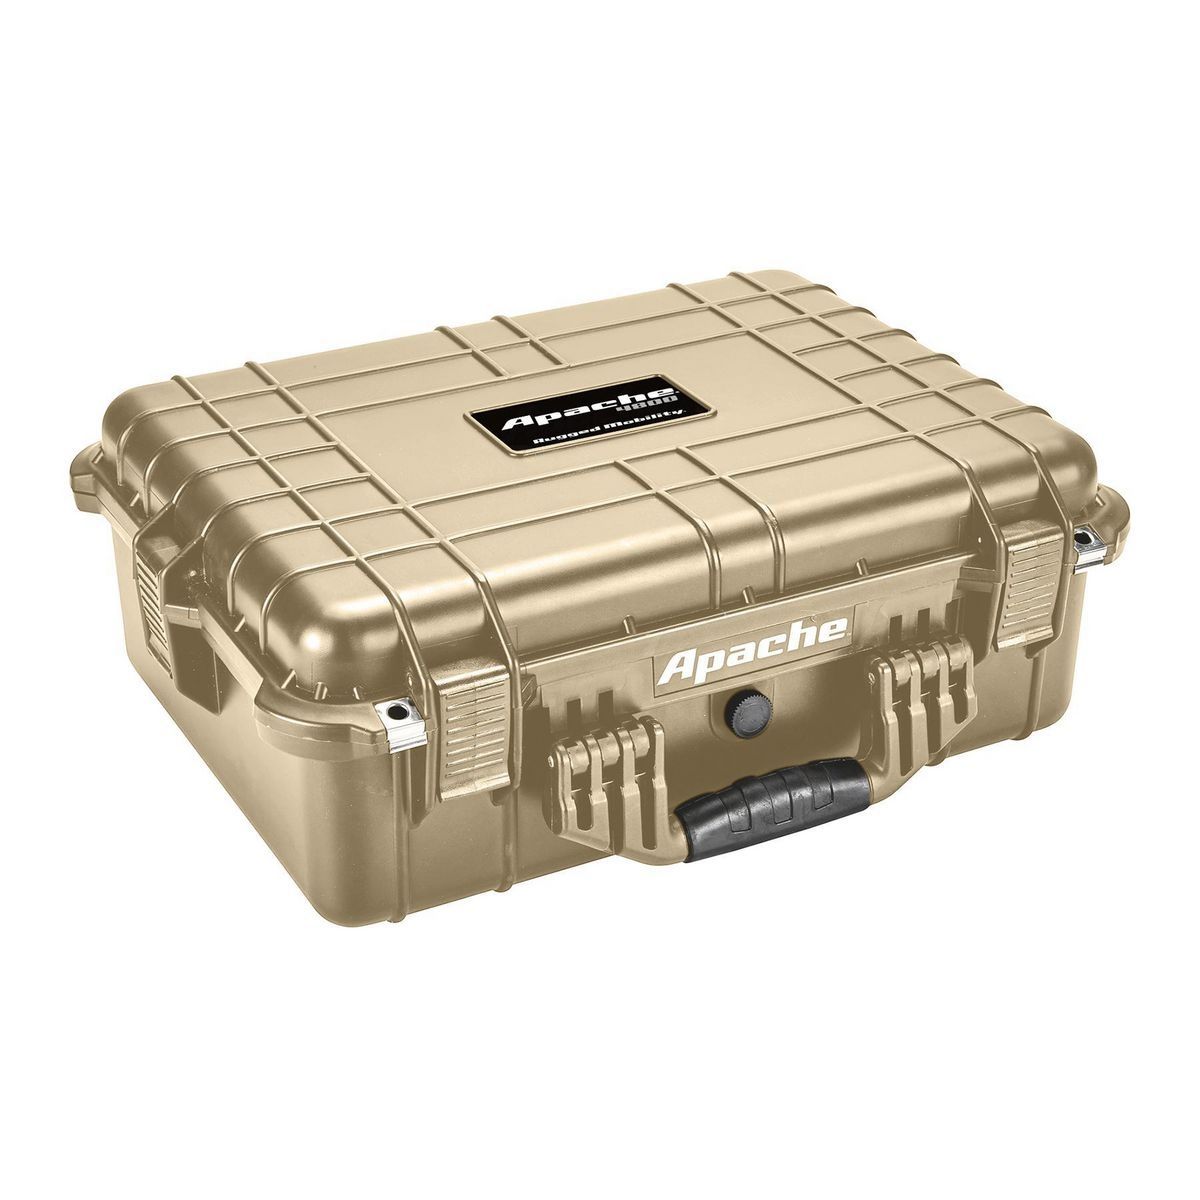 Tan Apache 4800 Weatherproof Protective Case, X-Large, Watertight, dust-tight, impact resistant protective case